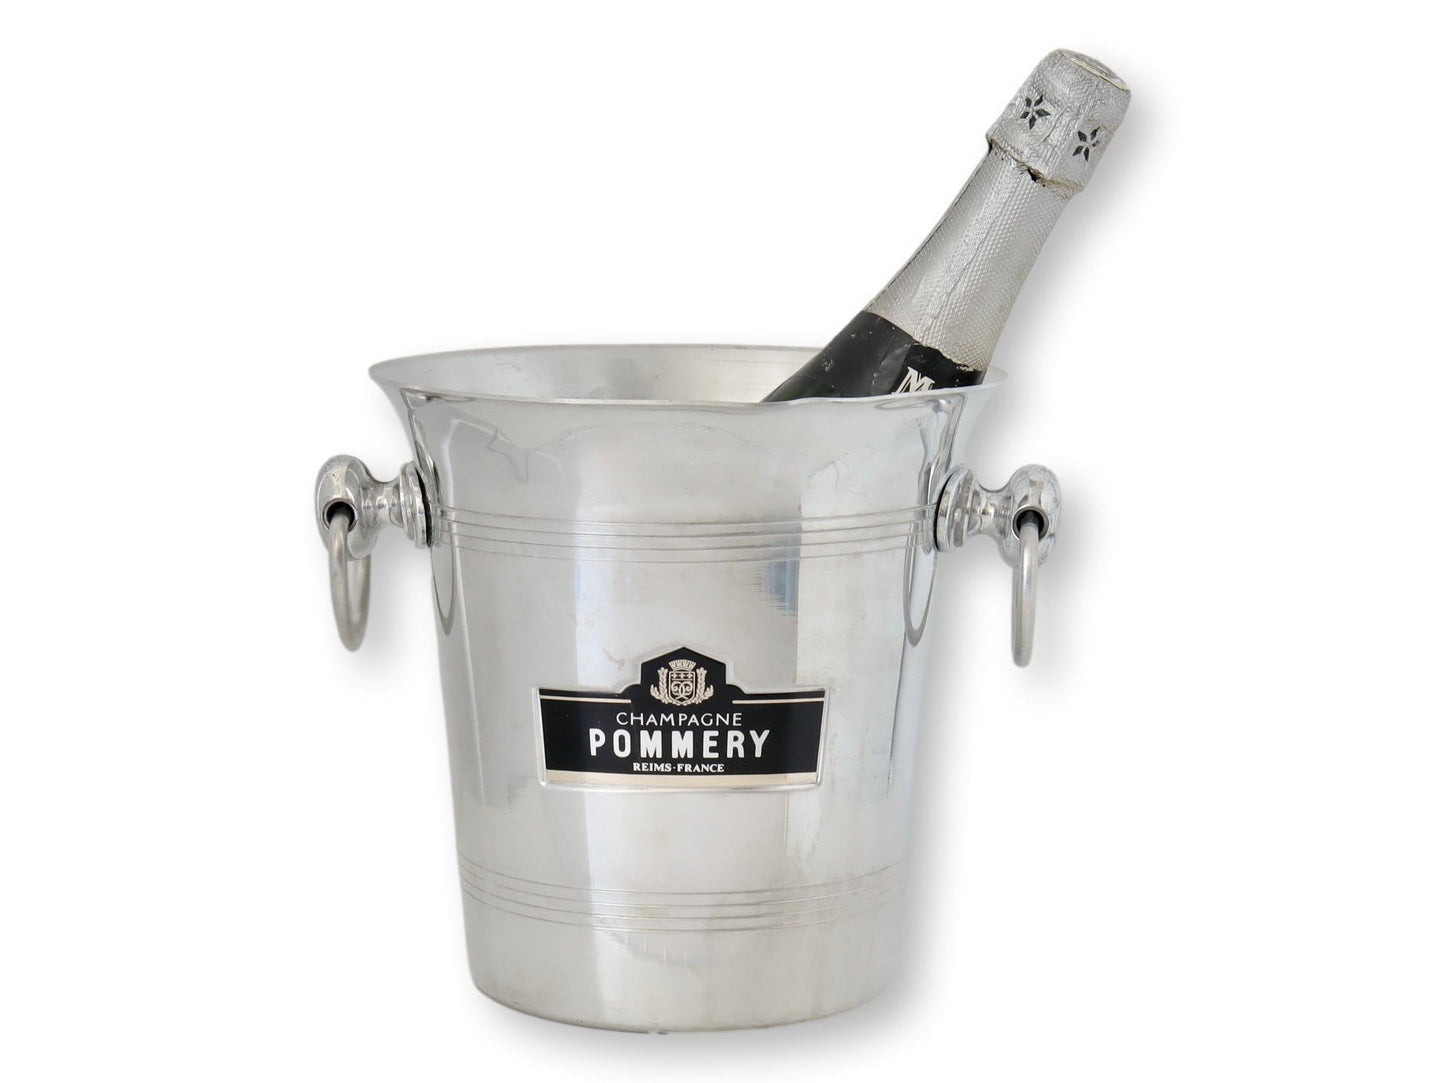 Vintage Pommery French Champagne Ice Bucket